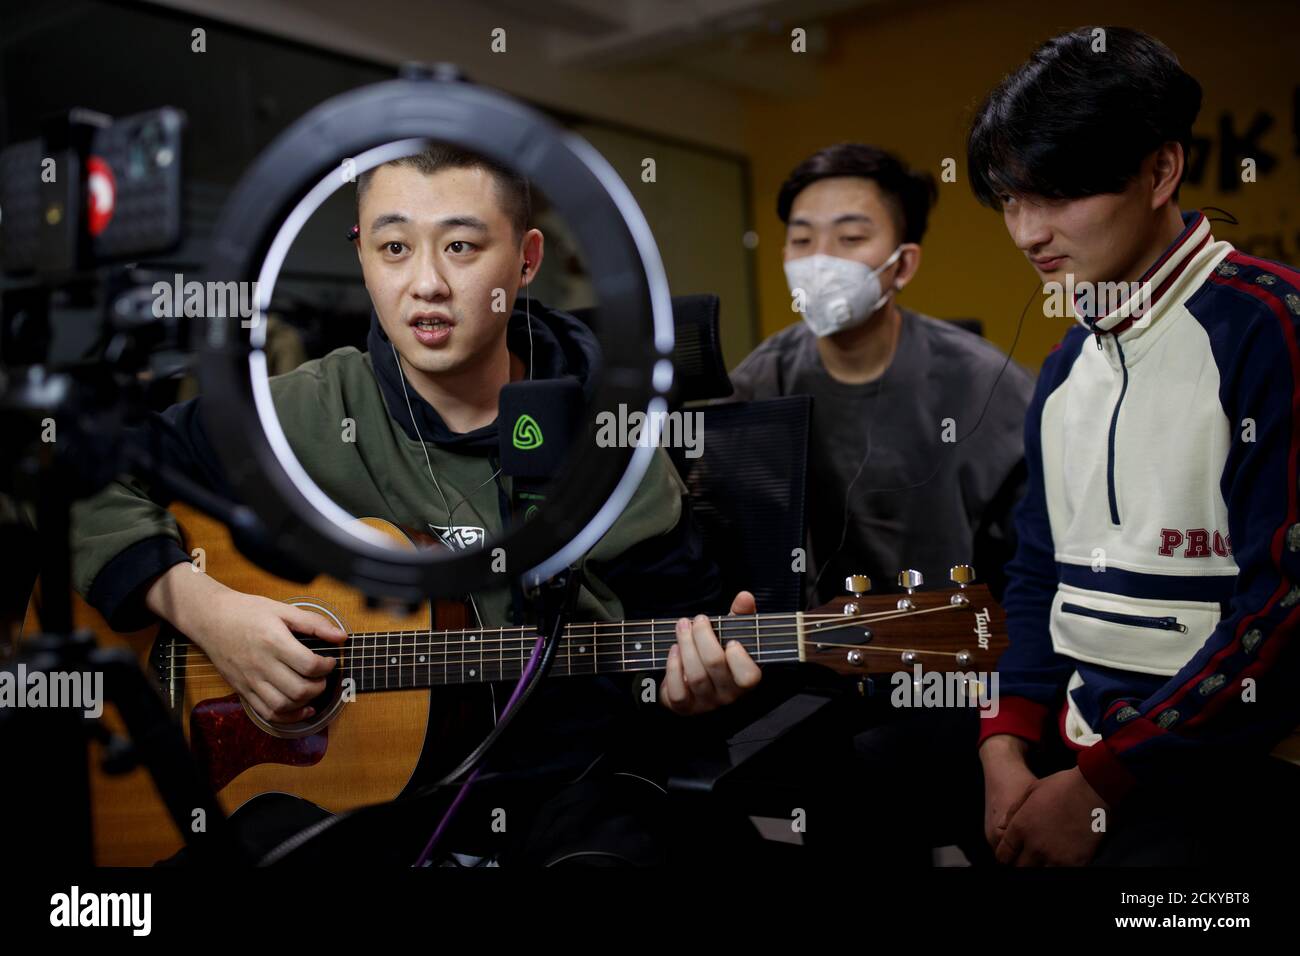 Musicians from the Chinese group 'The 2econd' Zhang Cheng, Zhuang Fei and Wen Zheng, perform for their fans during a live-streaming session broadcast on the video sharing website Bilibili at an office in Beijing, China, March 14, 2020. 'I see this period as a double-edged sword. Although some performance plans have been postponed, it gave us more time to cool down and reflect on our work and to make it more mature,' said Cheng. REUTERS/Thomas Peter     SEARCH 'COVID-19 LIFE ONLINE' FOR THIS STORY. SEARCH 'WIDER IMAGE' FOR ALL STORIES. Stock Photo